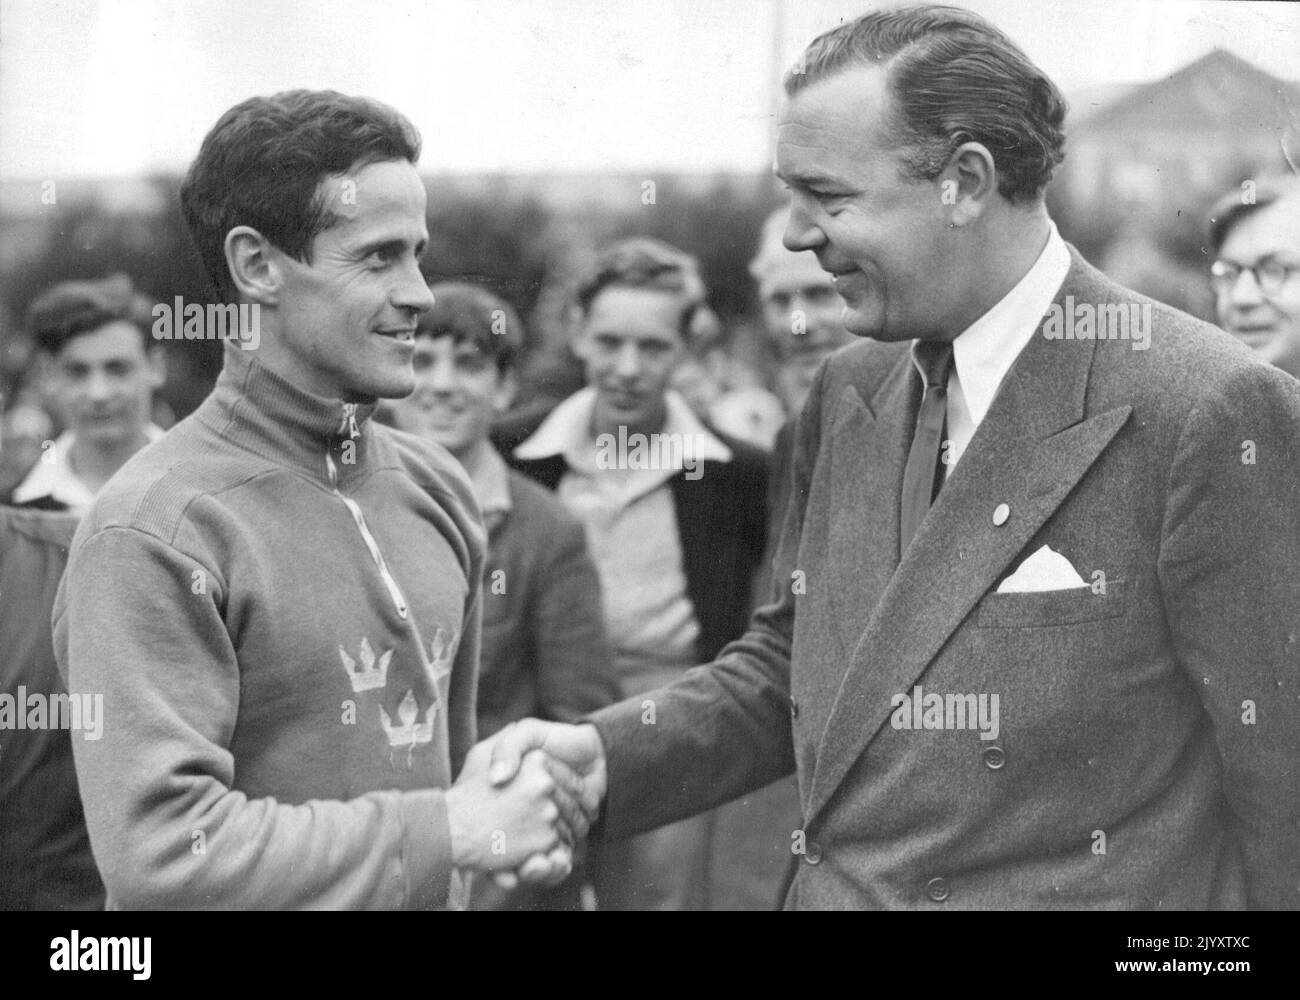 Prince Congratulates world's best athlete Sweden wind Olympic Pentathlon sets New record Camberley, Eng: Captain W.O.G. Grut of Sweden (left) is congratulated by Prince Bertil of Sweden after the 4,000-meters cross country run which was final test of the Olympic games modern Pentathlon and confirmed Grut as winner of the combined event. Grut finished eighth in the run in 15 minutes 28.9 seconds but had secured first place in three of the previous tests riding, fencing and swimming to achieve a total of 16 points. This is a new Olympic record, the previous record having been 17 points. August 0 Stock Photo